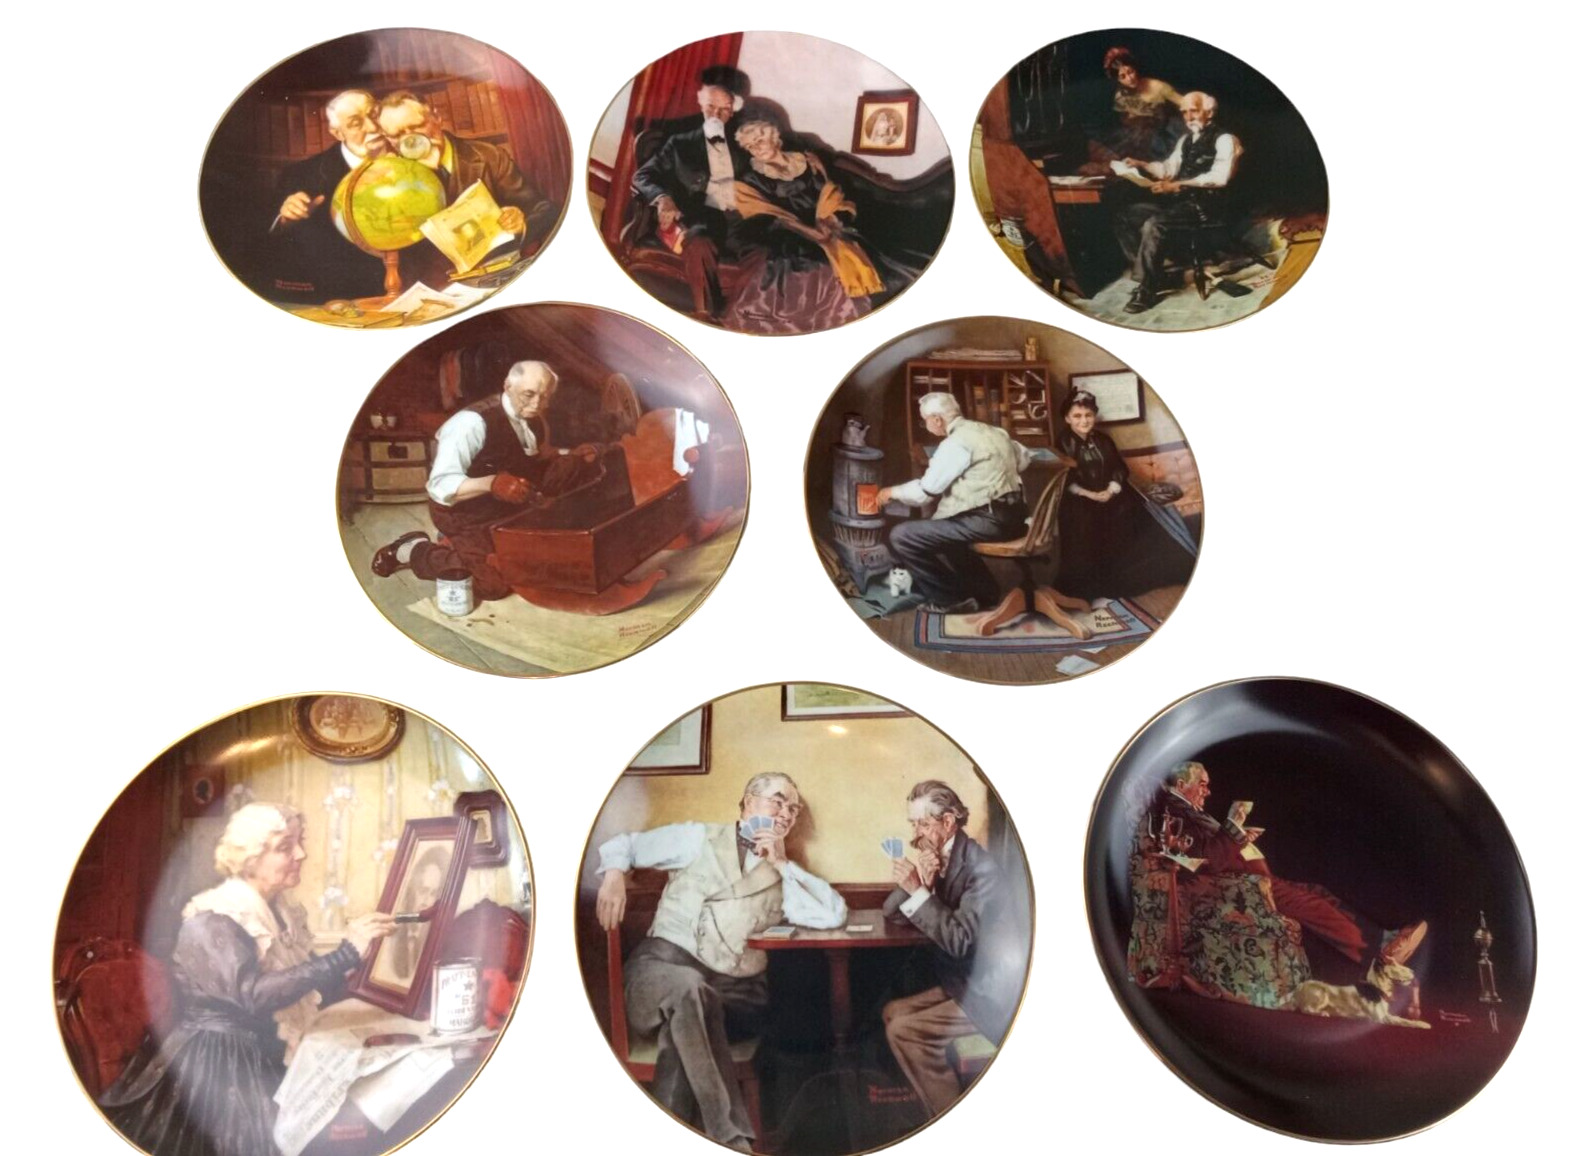 Knowles Norman Rockwell GOLDEN MOMENTS Complete Set All 8 Collector Plates MINT